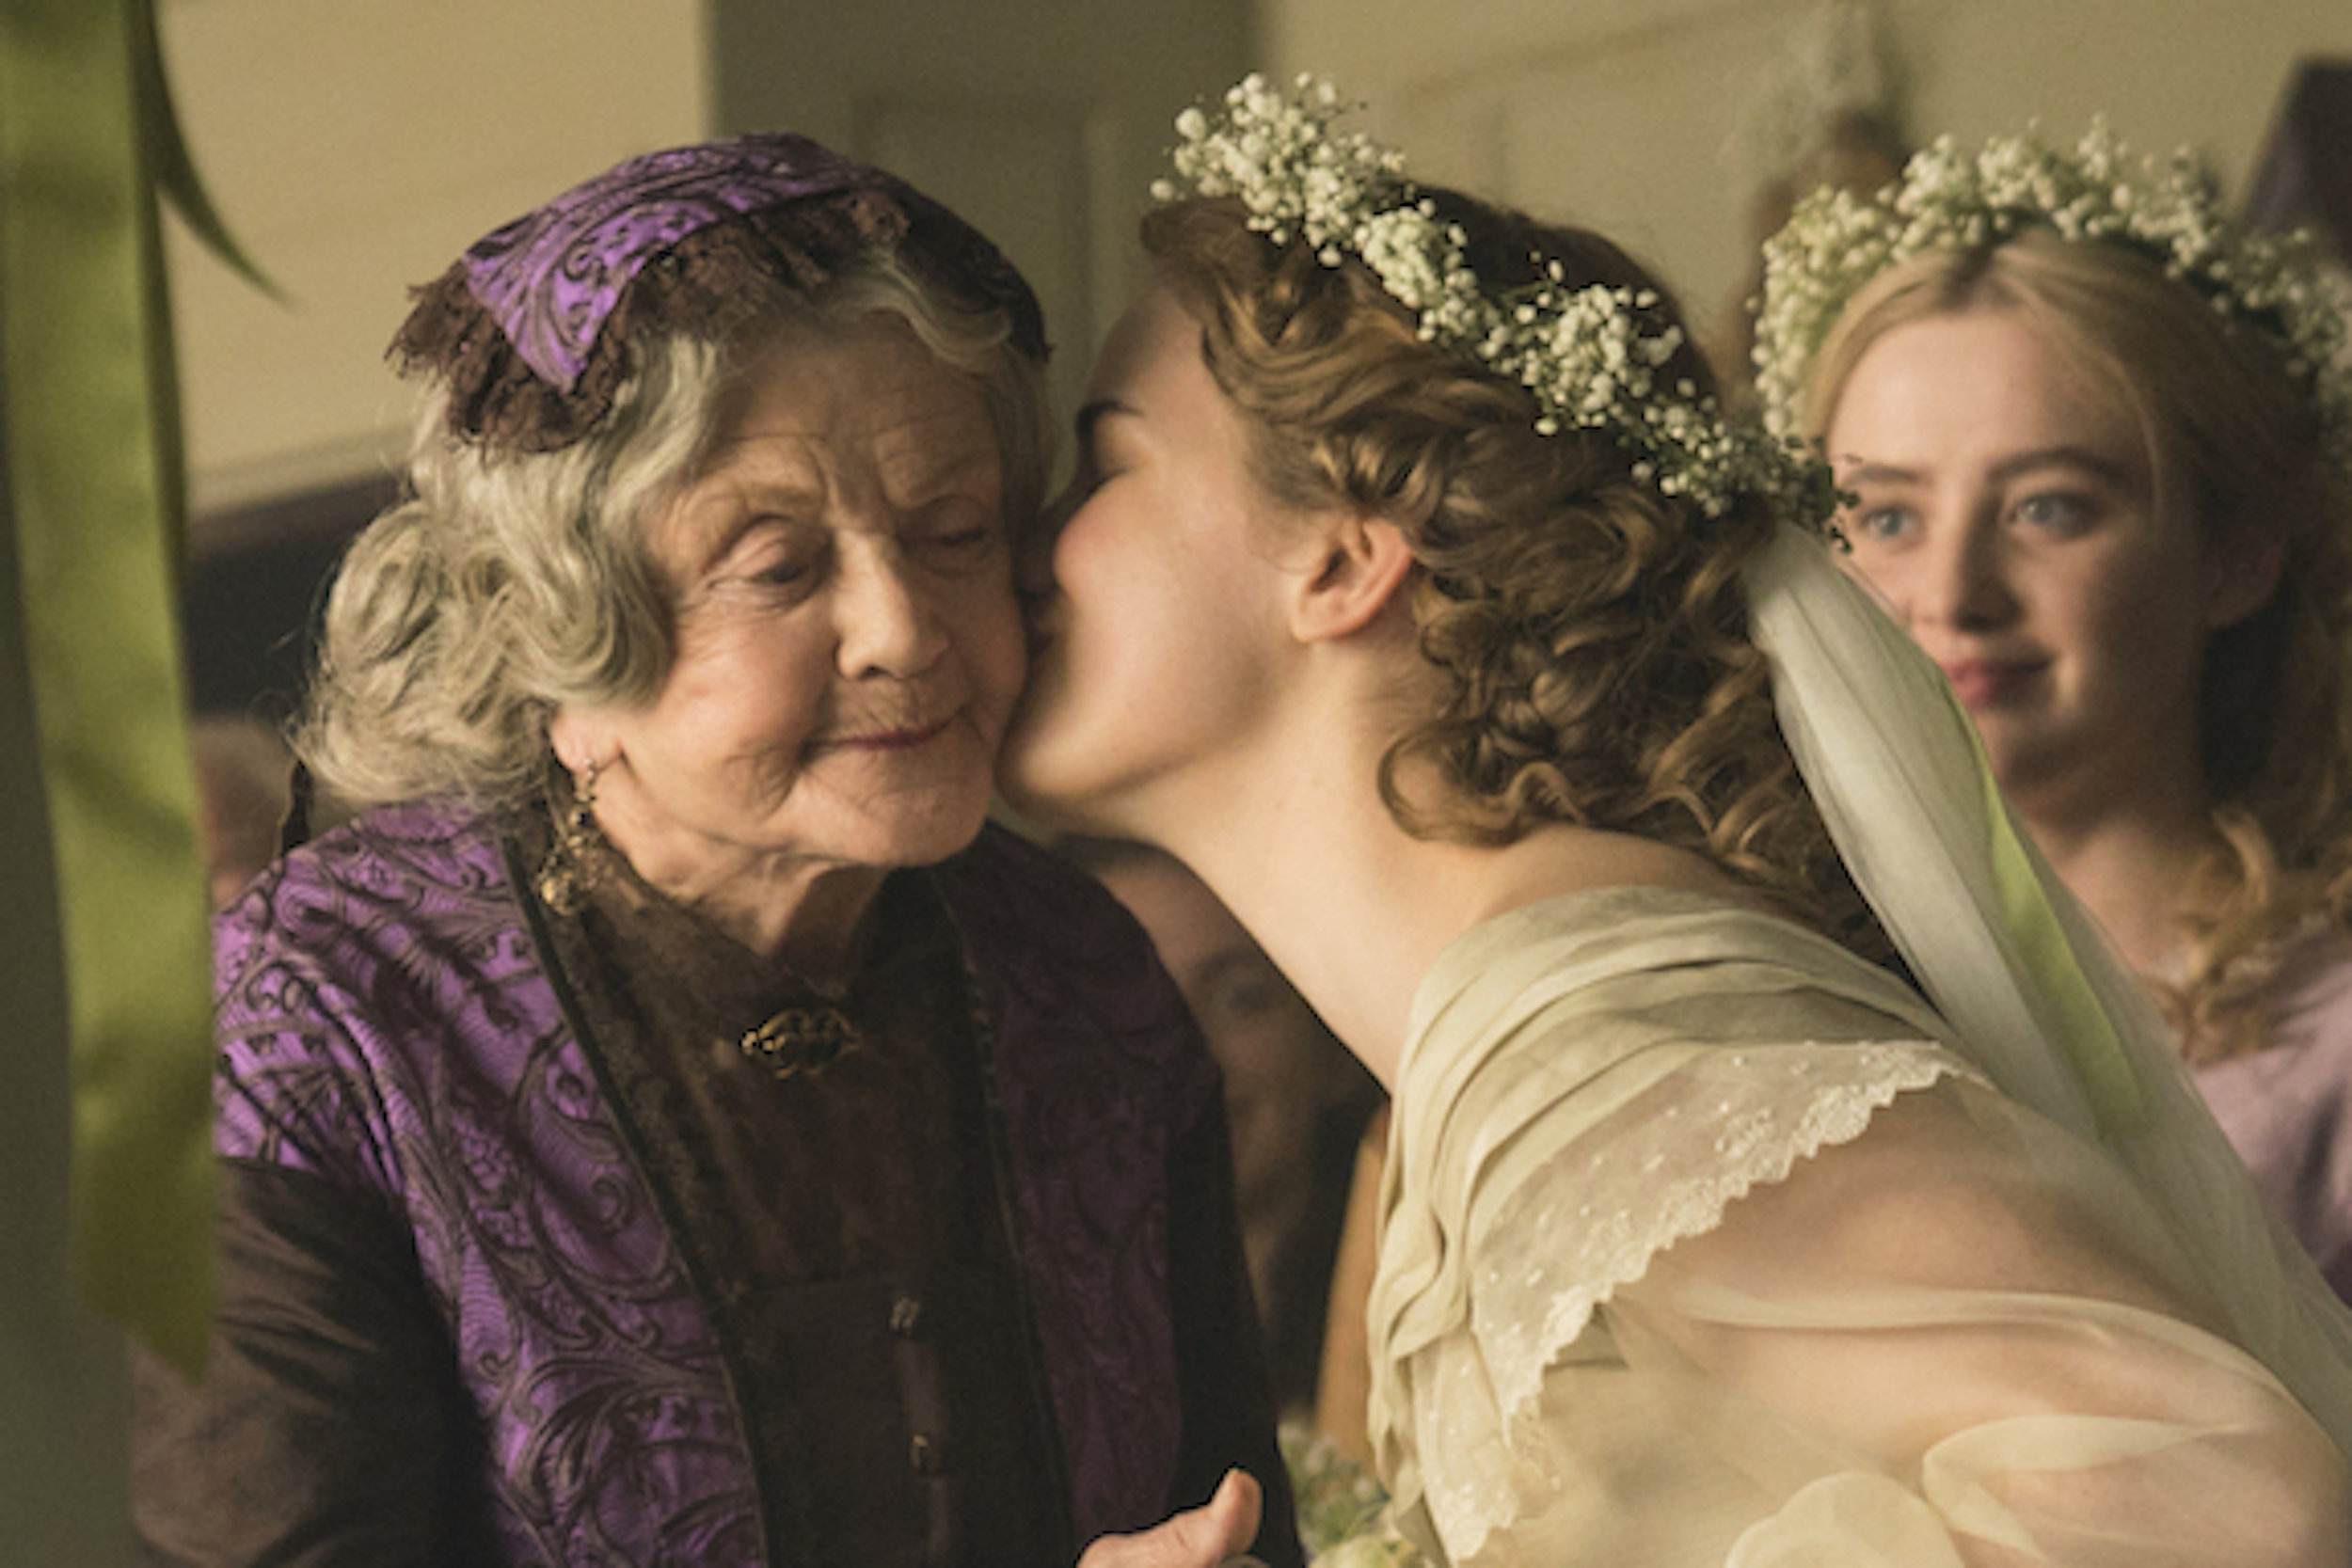   LITTLE WOMEN  “Your heart will be warmed over and over again”  The Boston Globe  